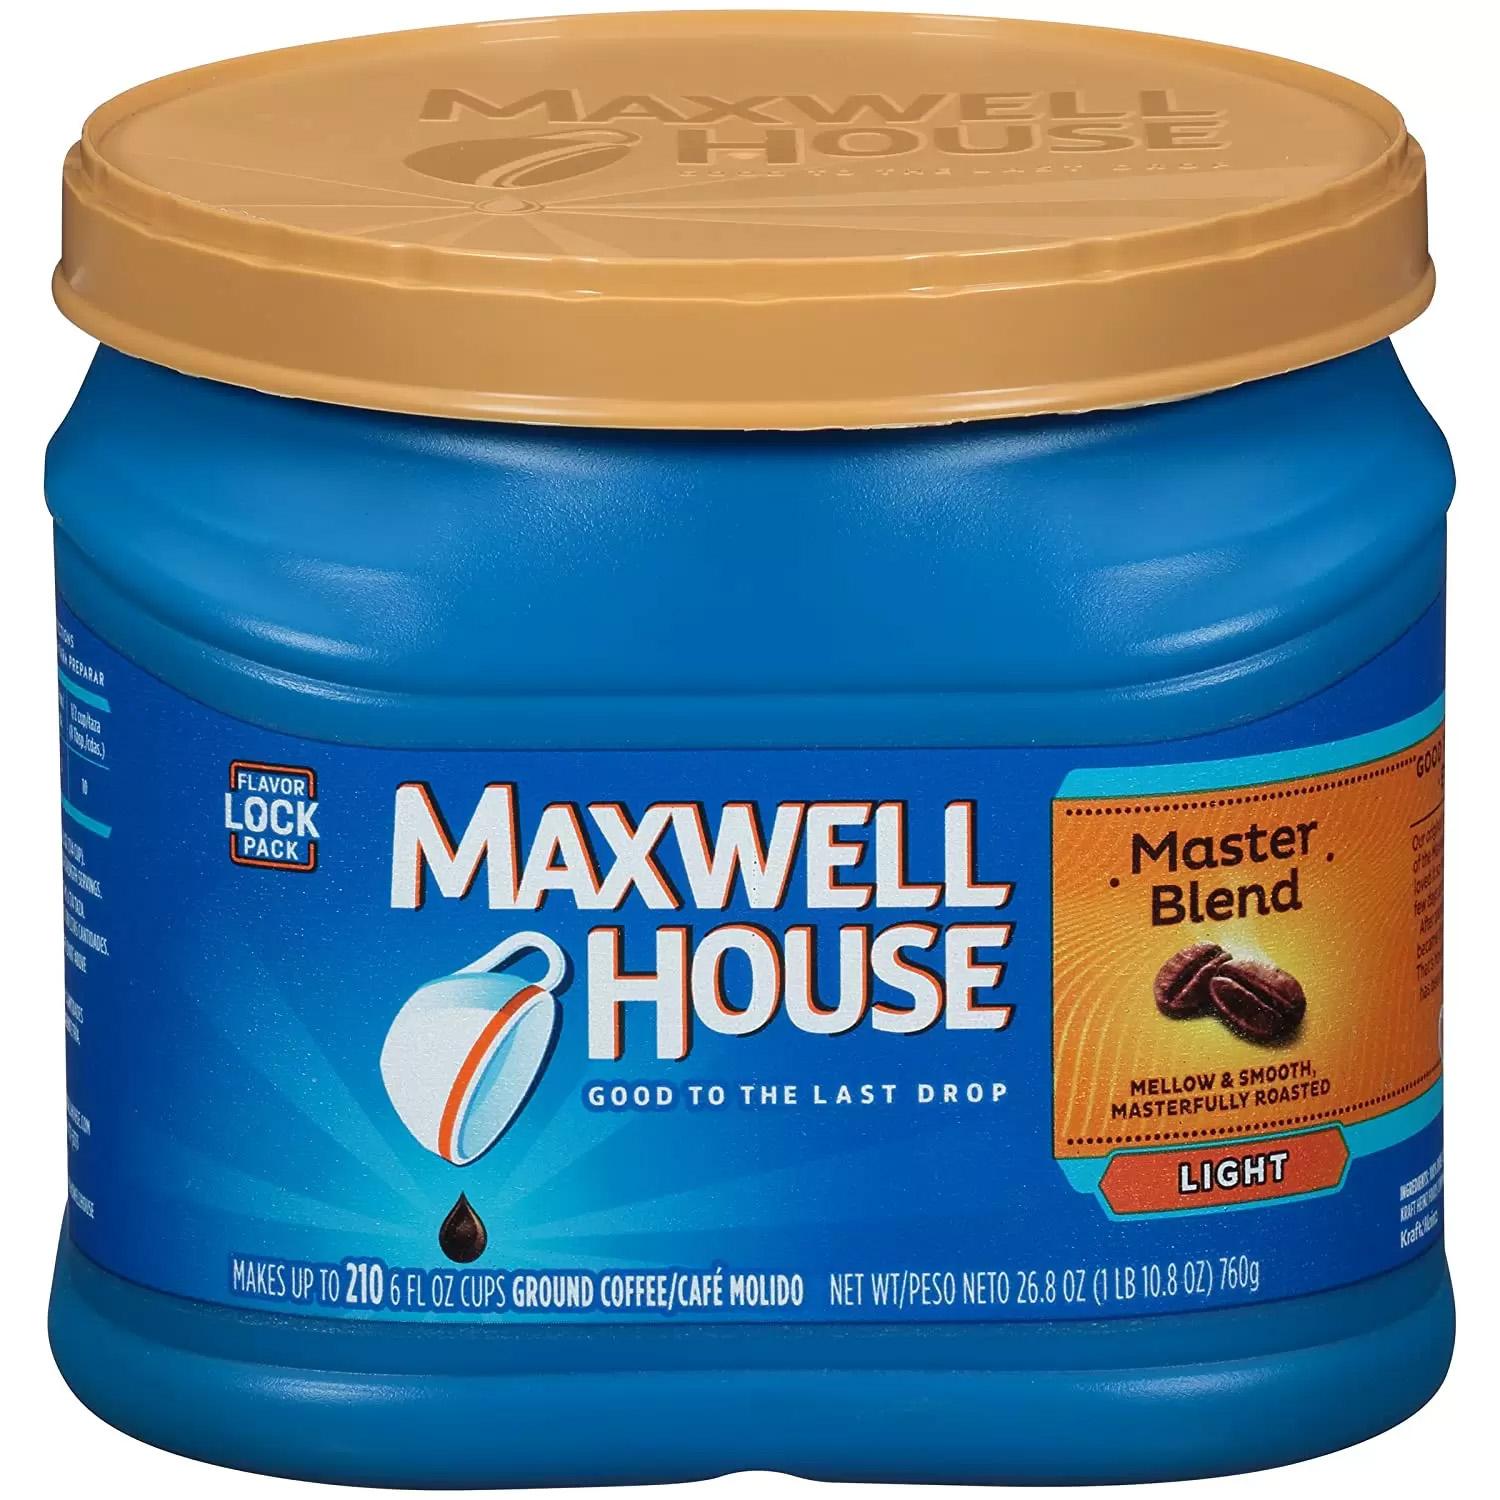 Maxwell House Master Blend Ground Coffee for $4.15 Shipped